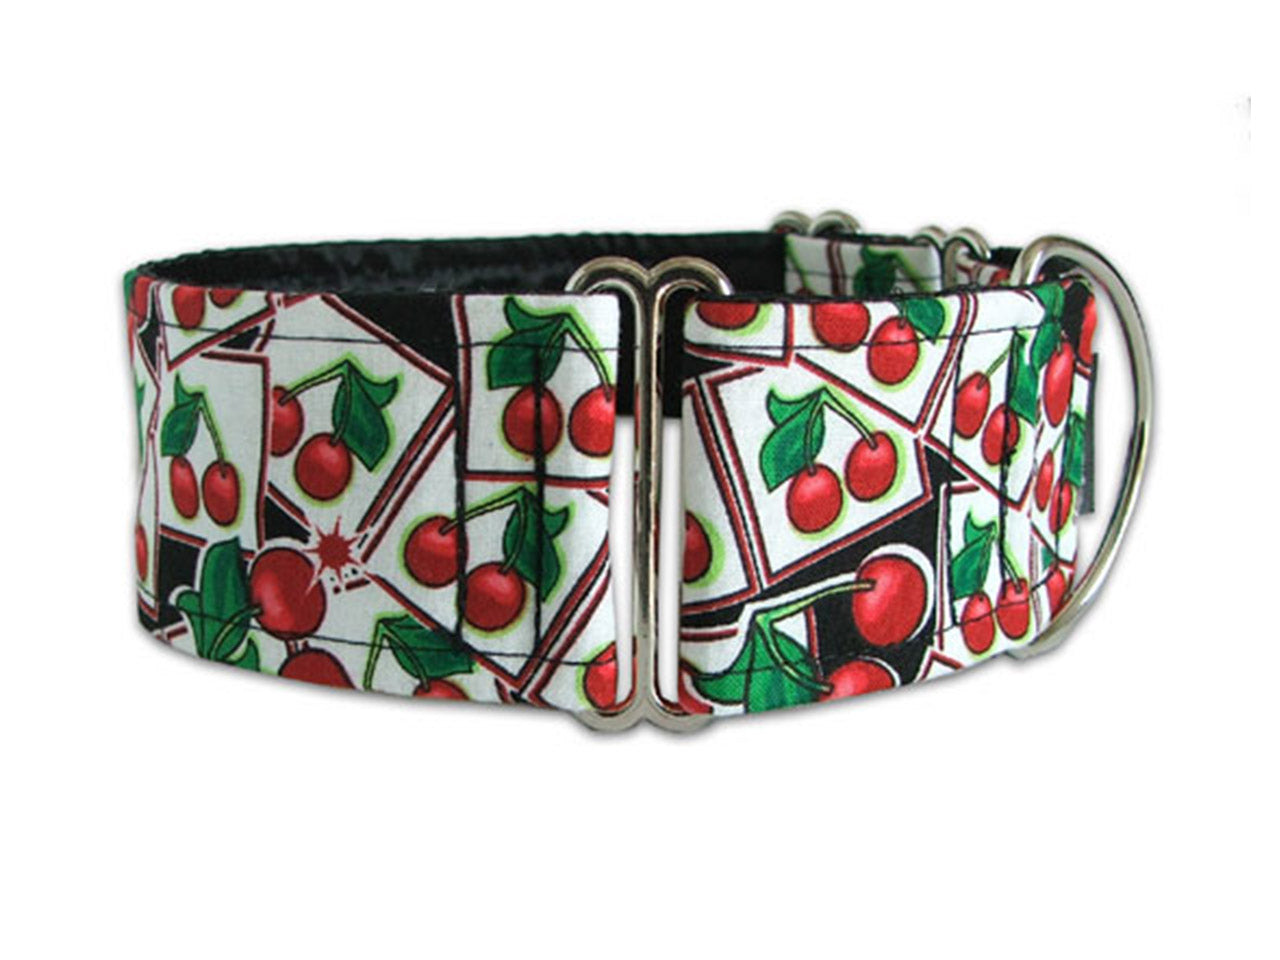 Wearing this lucky cherry collar will make your pooch feel like he's hit the jackpot!